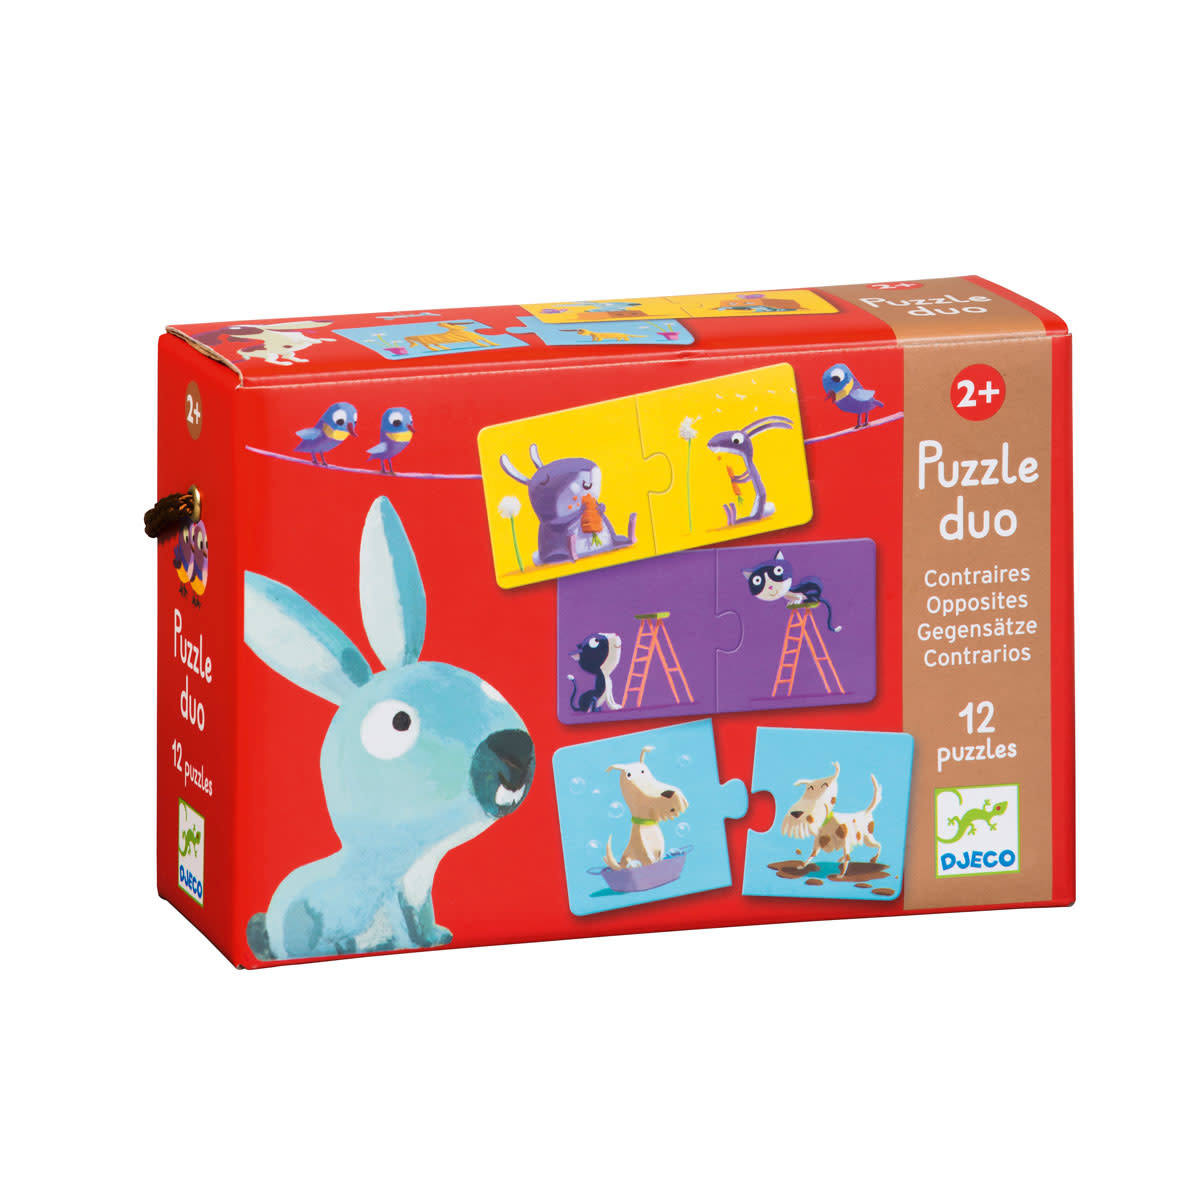 Puzzle duo les ombres 2 ans Djeco